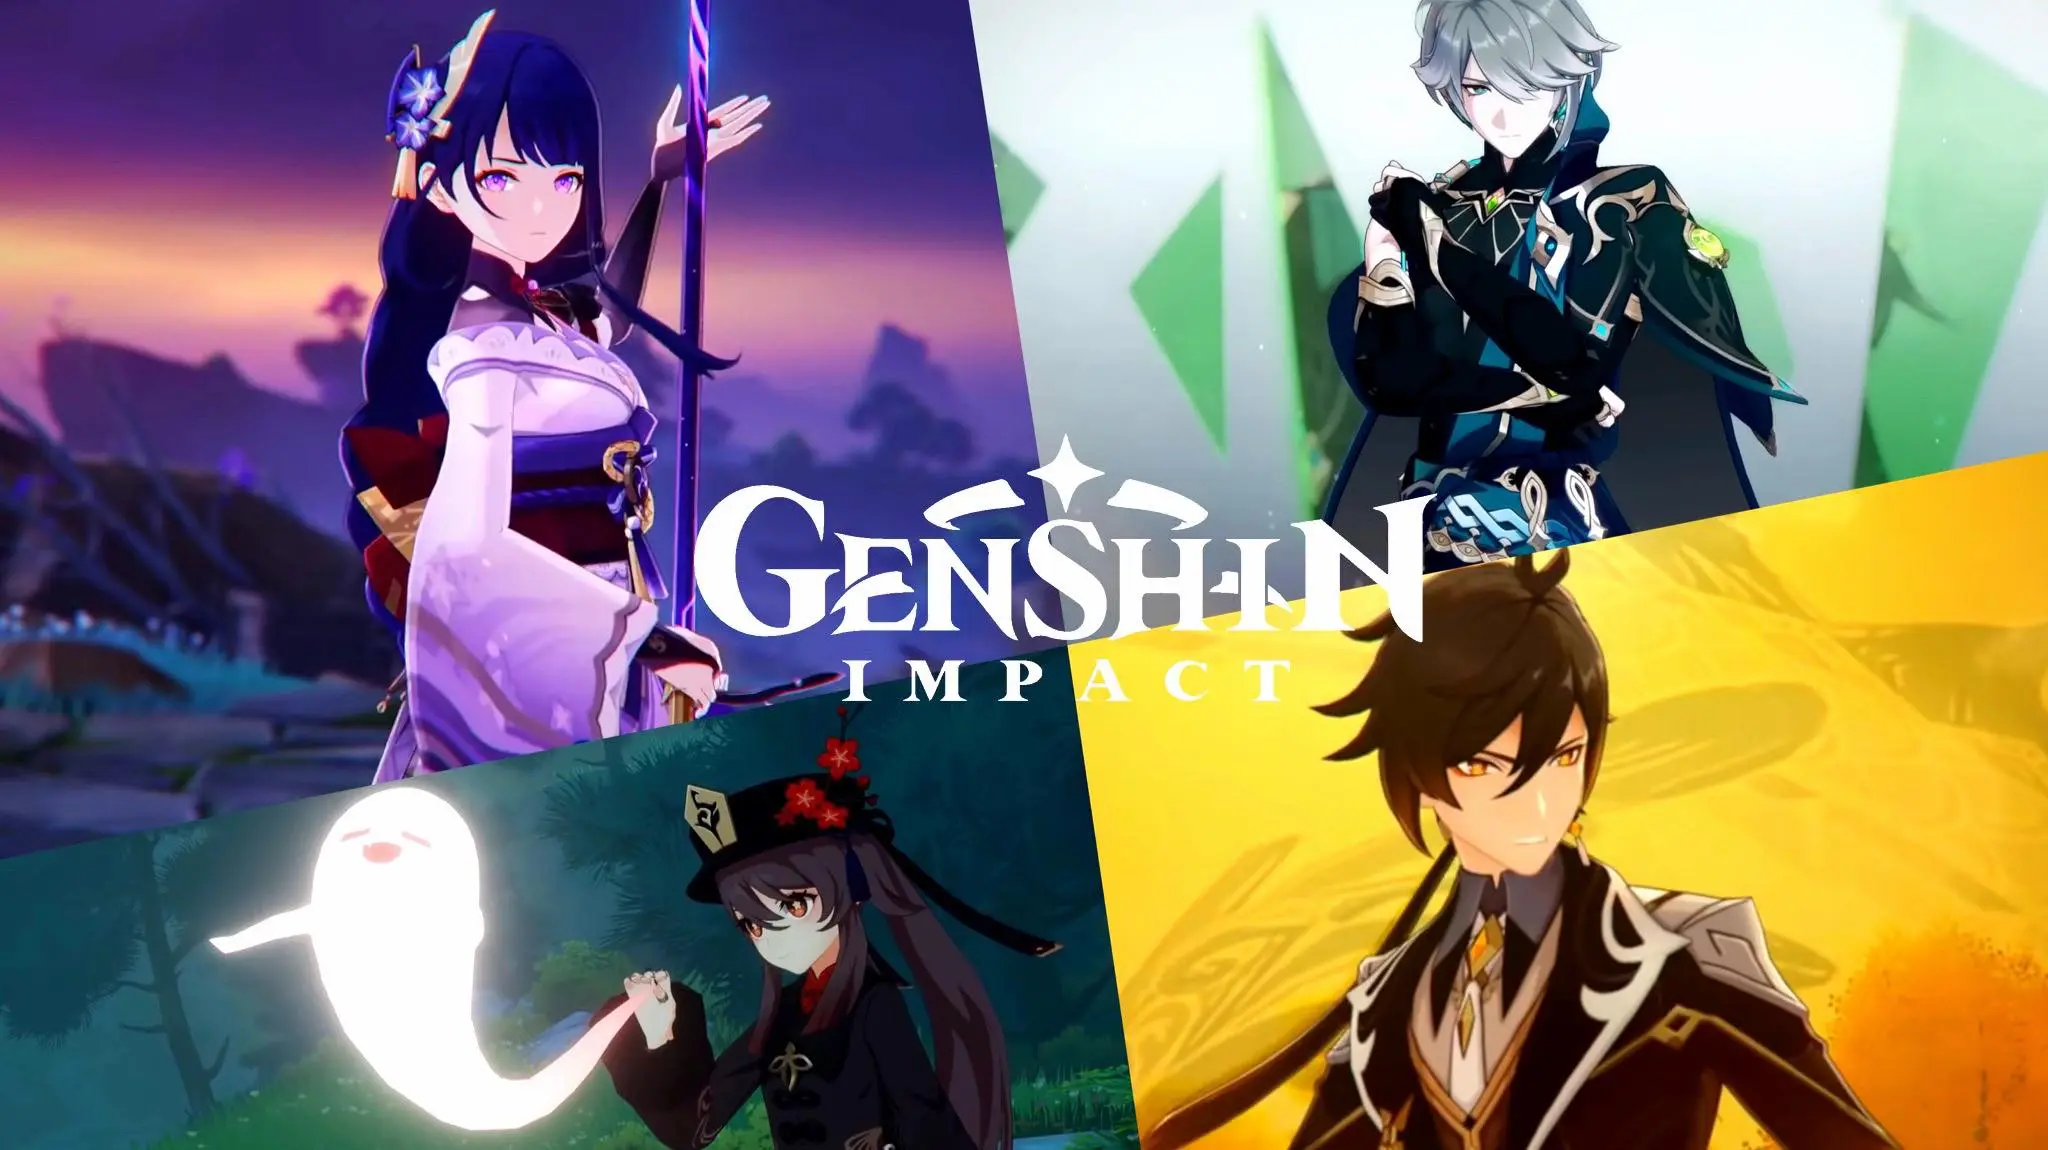 Genshin Impact new characters in the 4.4 update and beyond